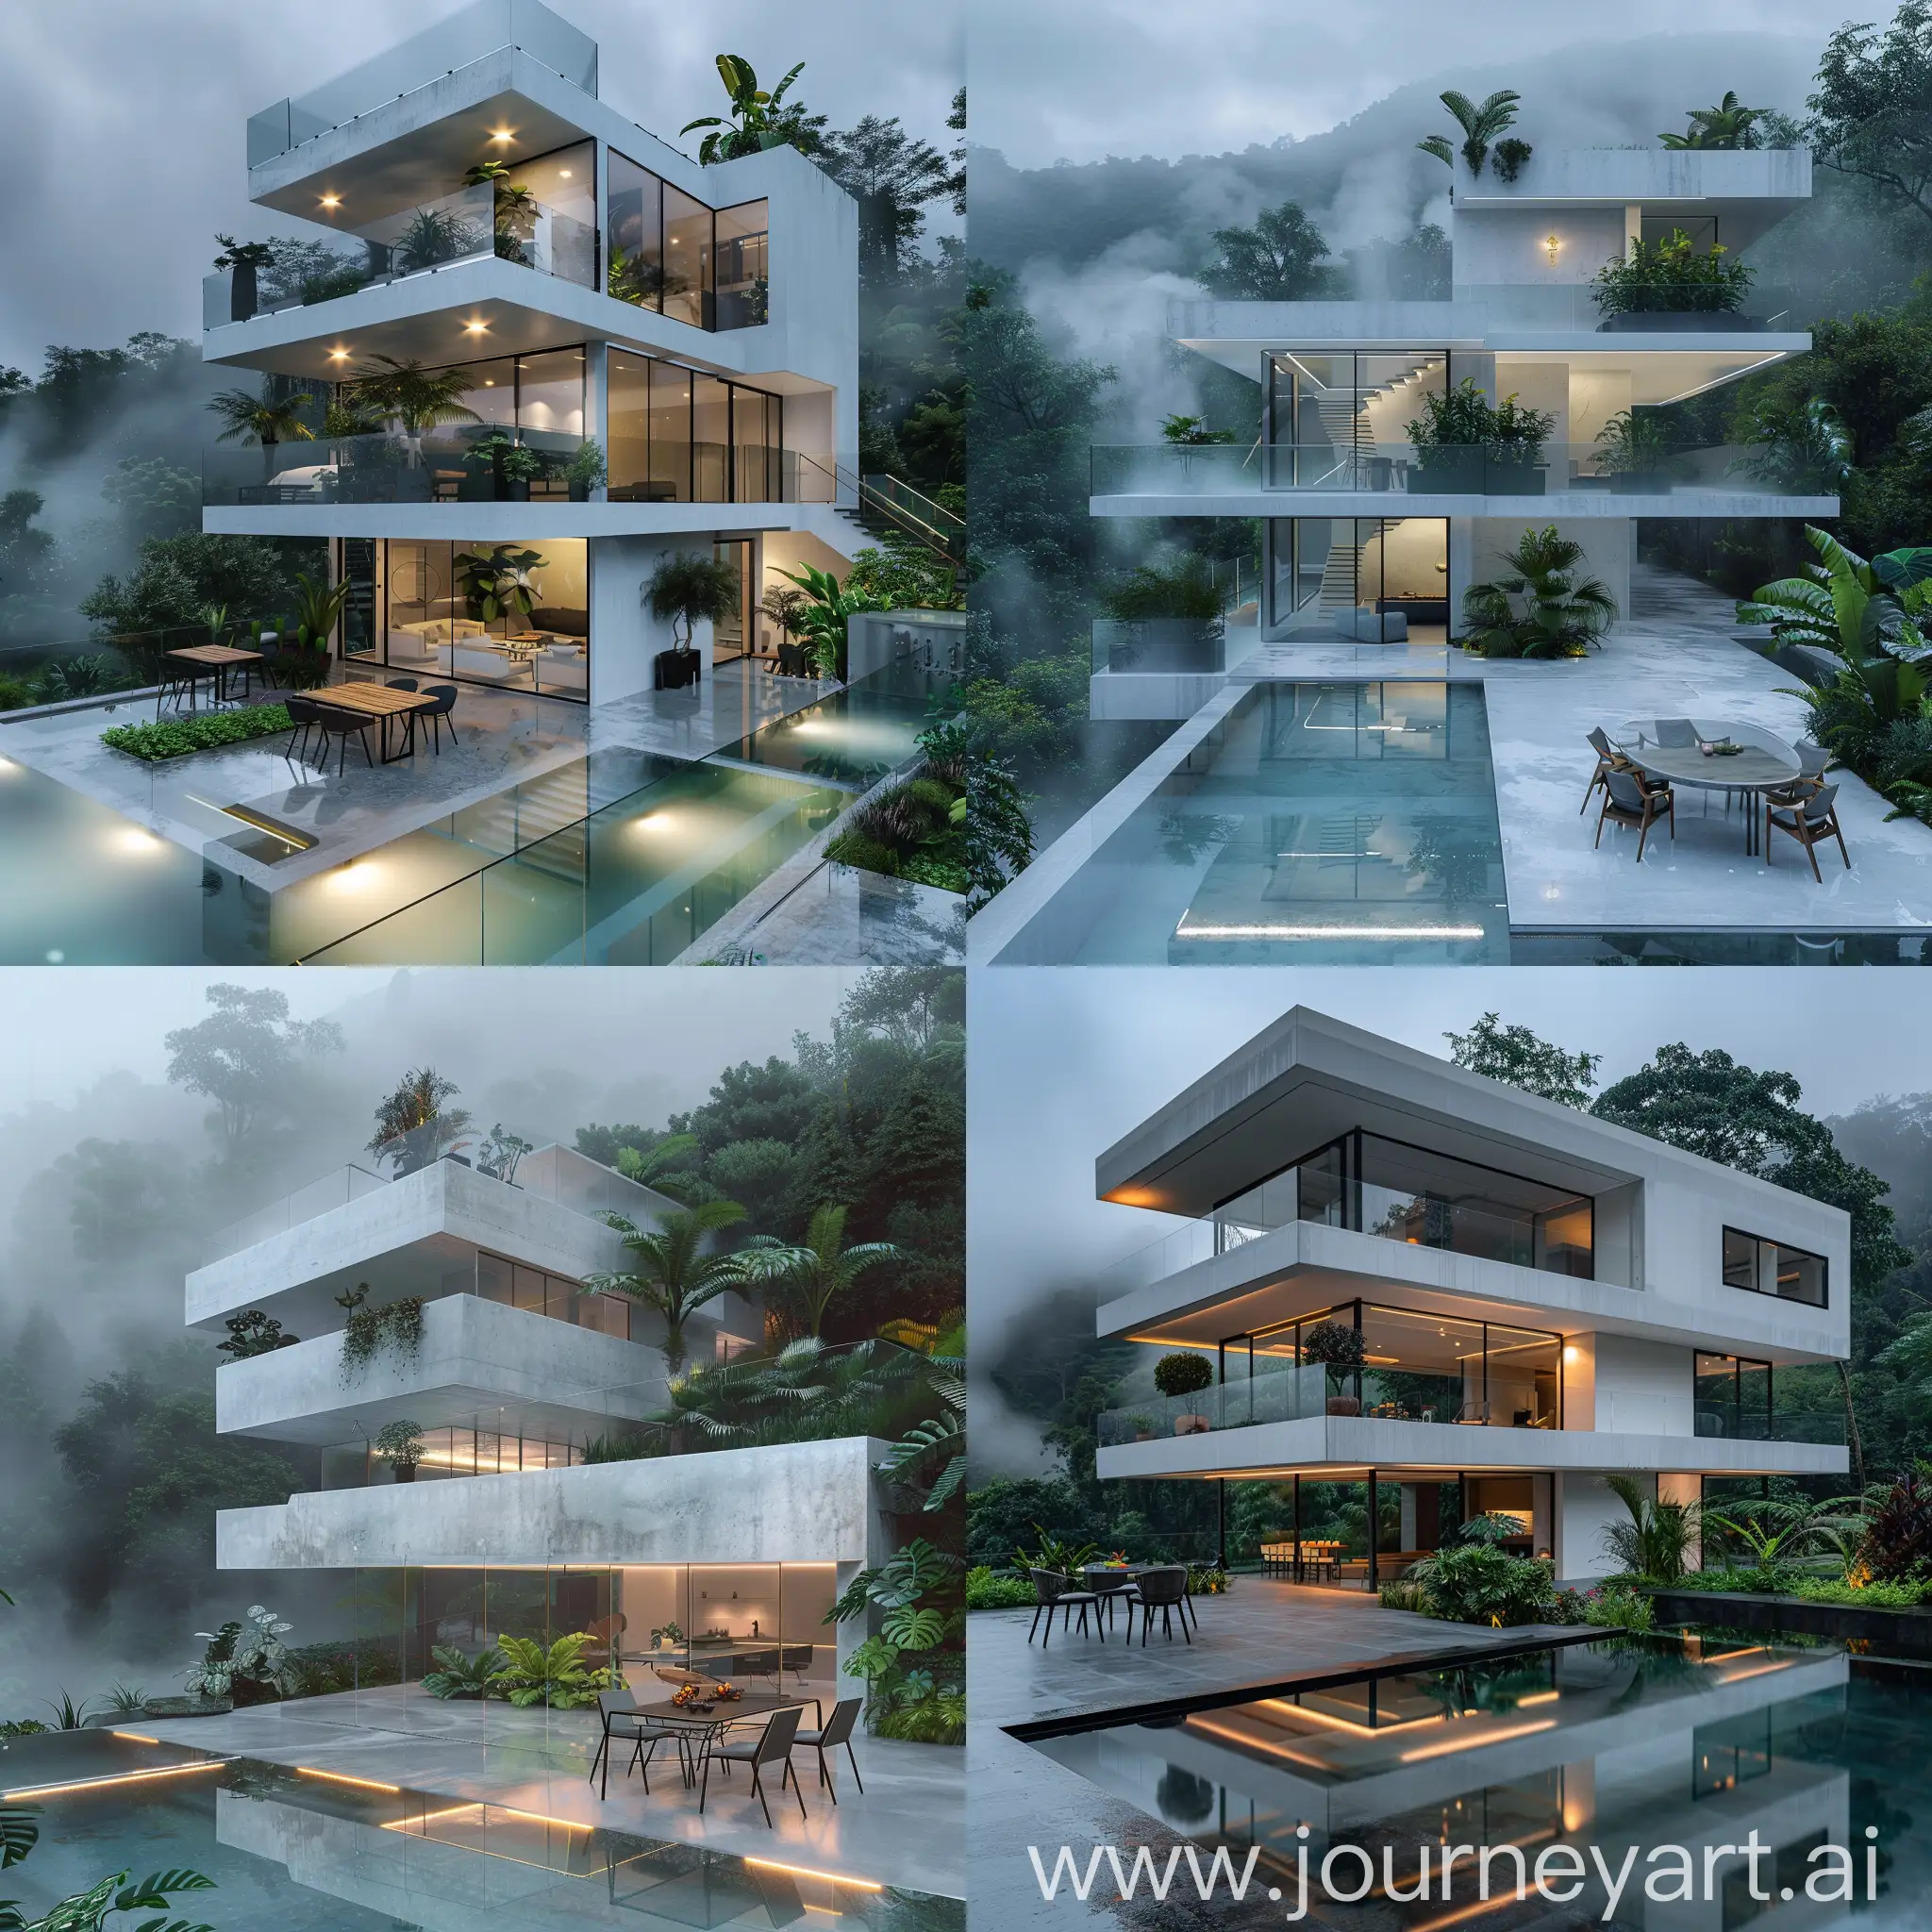 Luxurious-ThreeStory-Villa-with-Glass-Infinity-Pool-in-Tropical-Forest-Setting